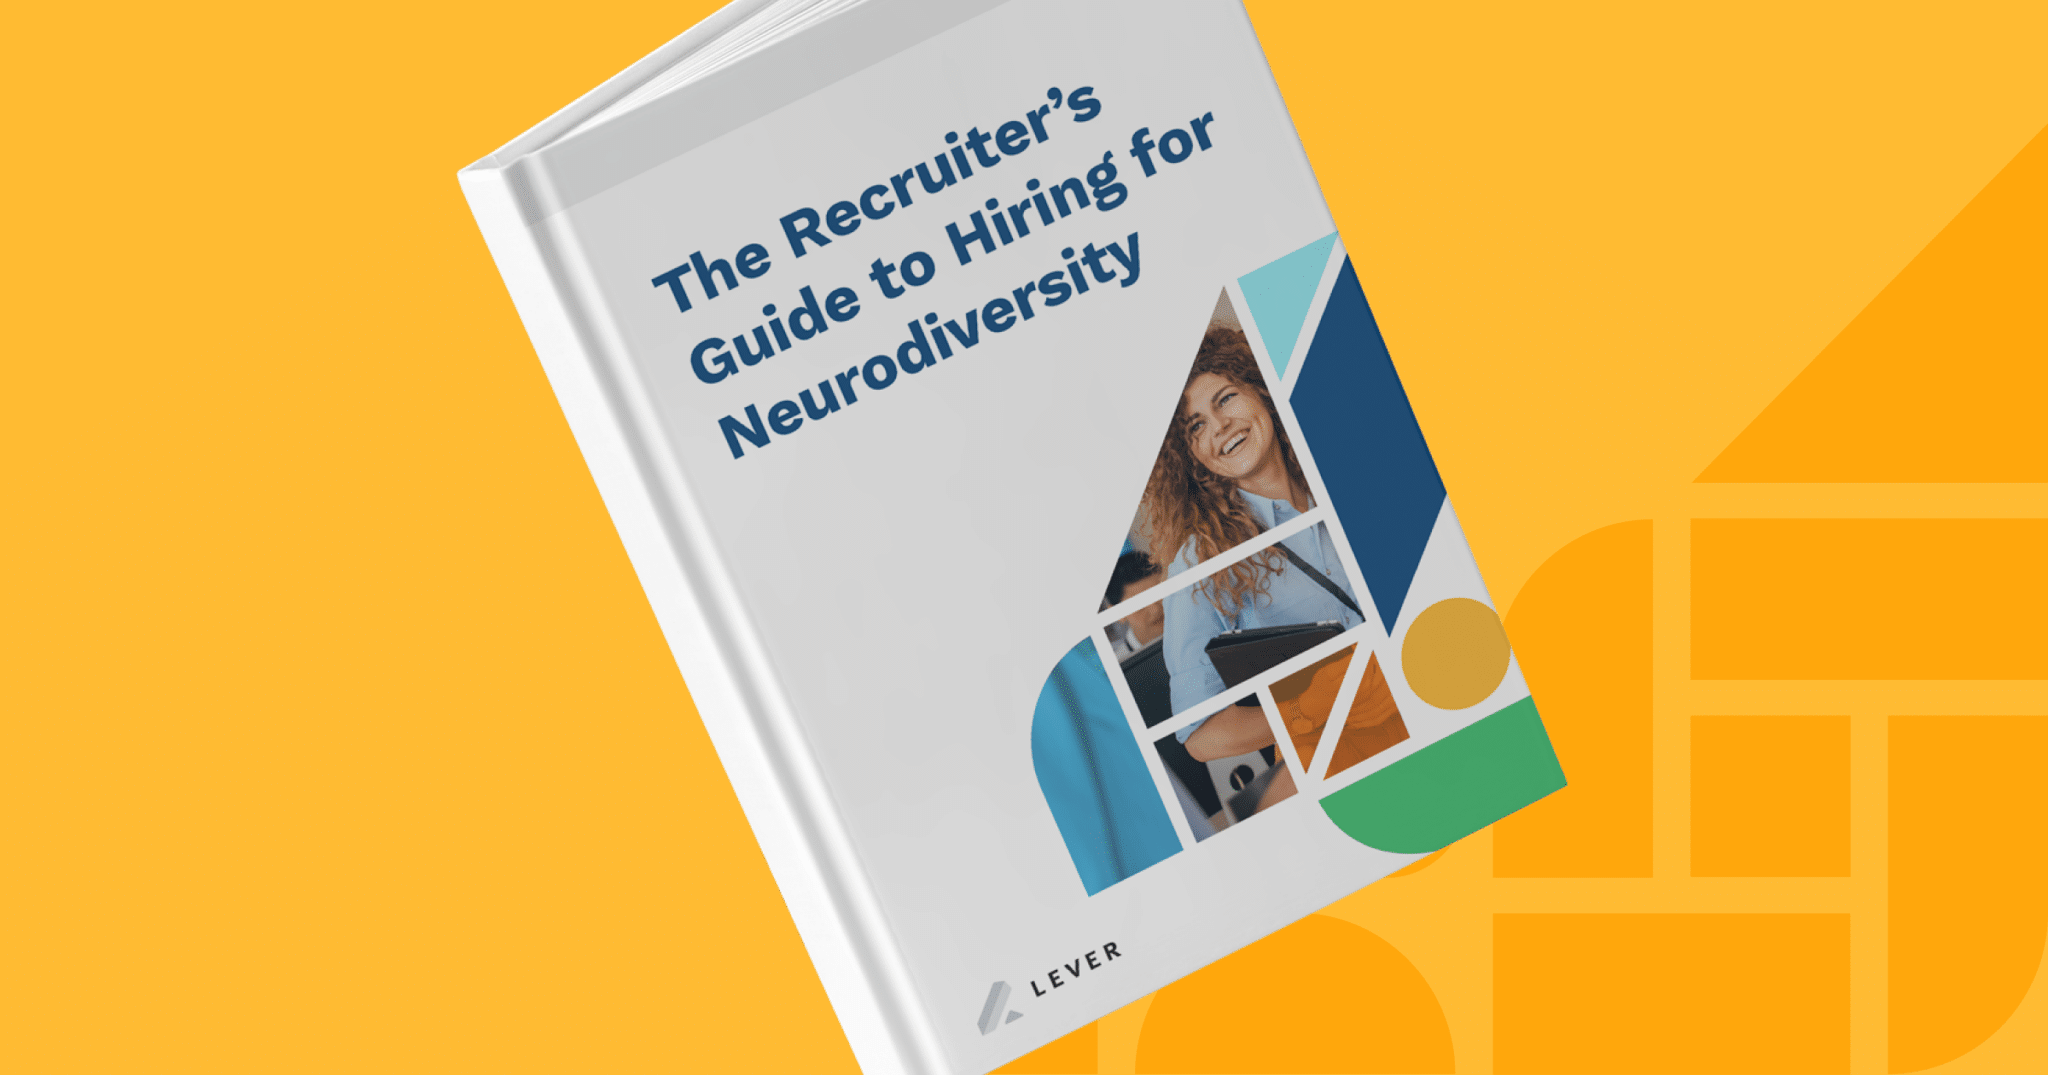 The Recruiter's Guide to Hiring for Neurodiversity eBook thumbnail